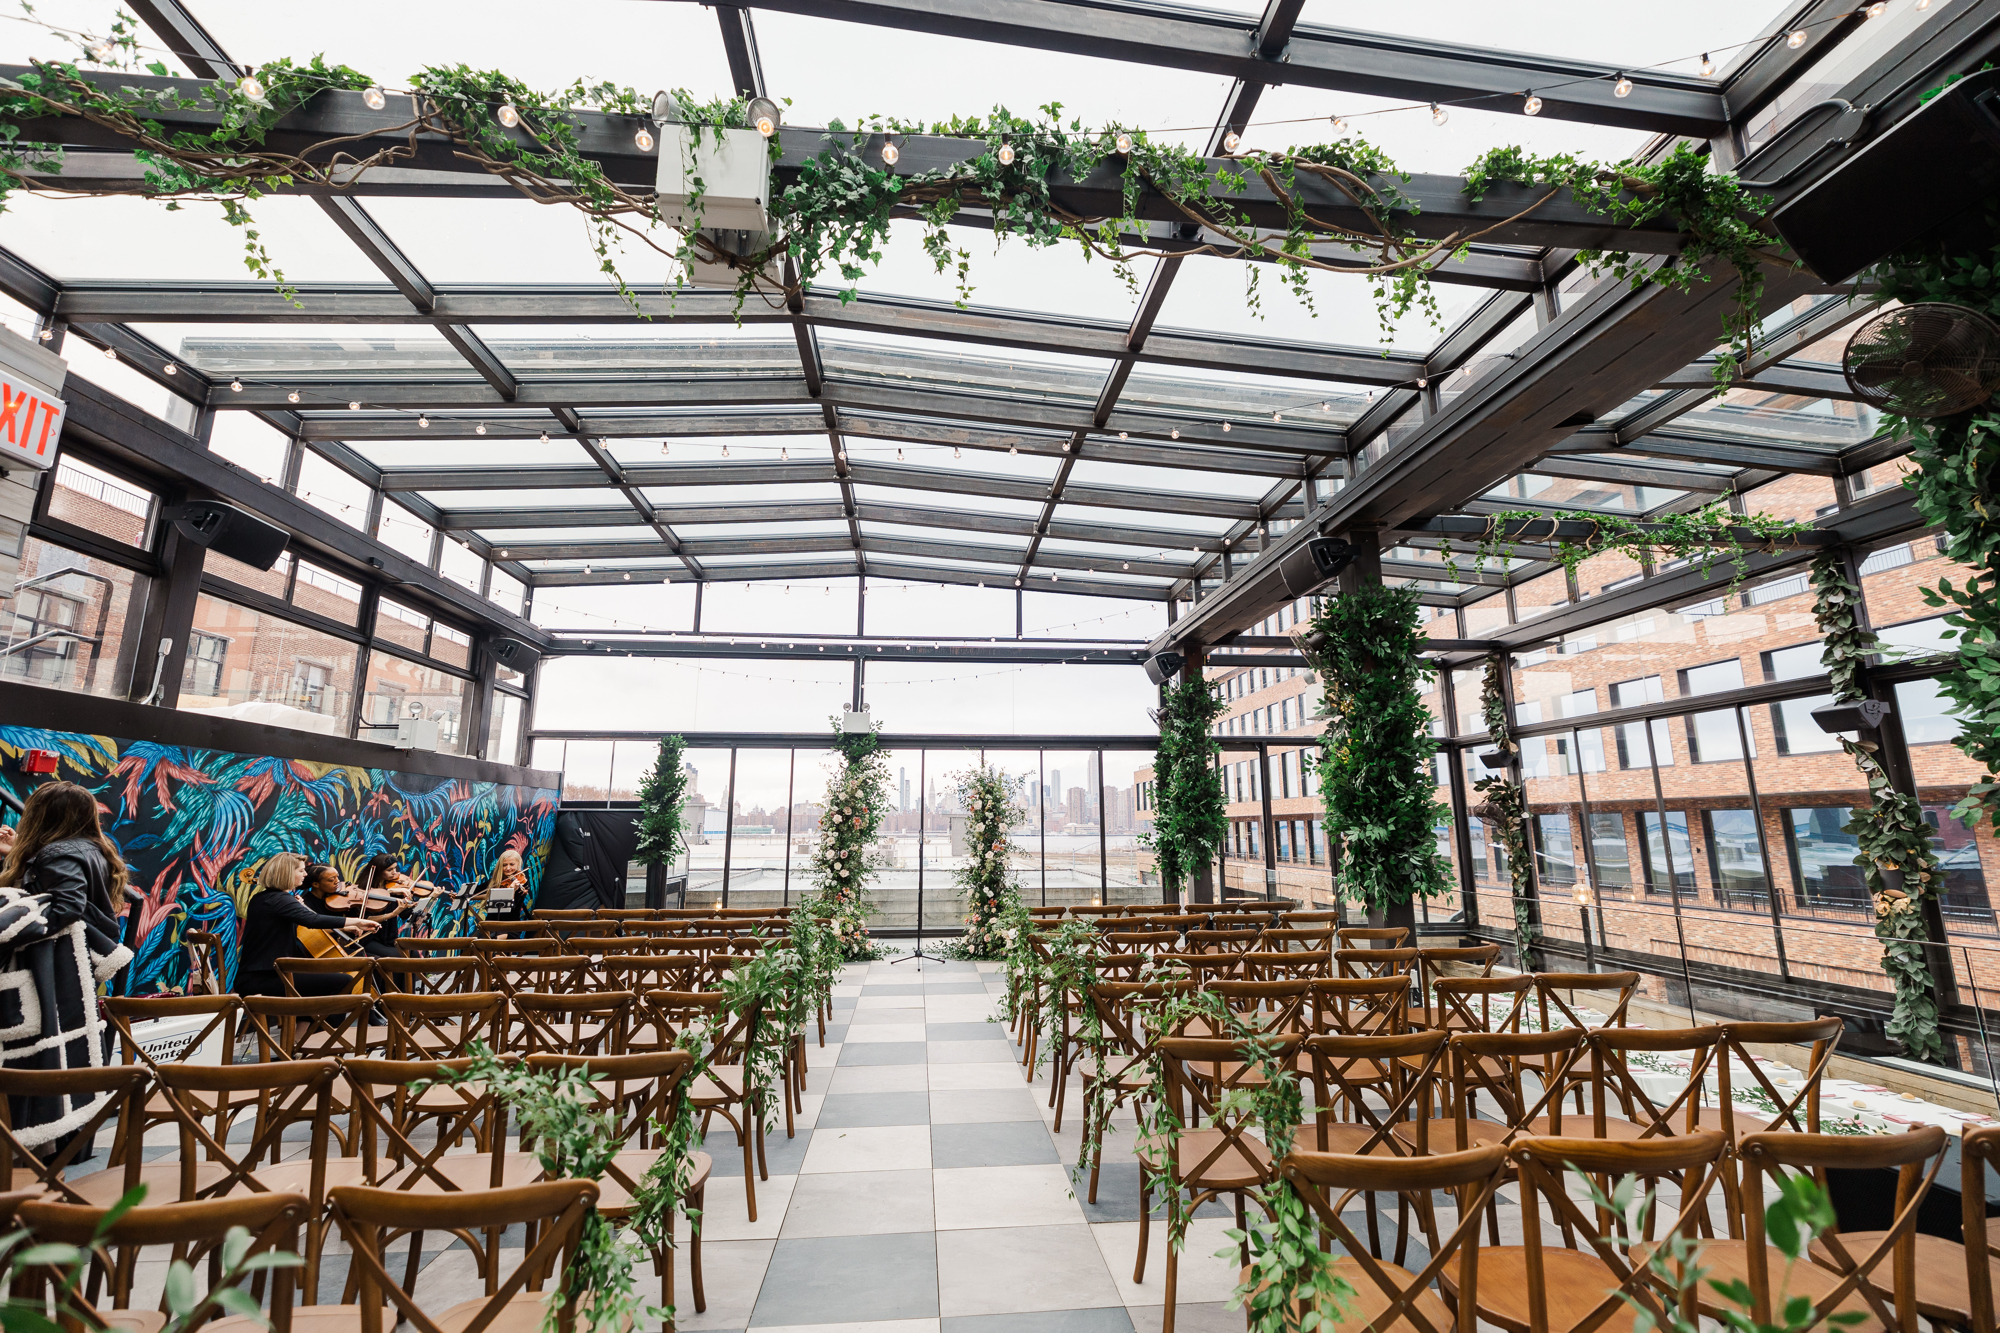 Fantastic Brooklyn Wedding Photography at 74Wythe with Rooftop NYC Views